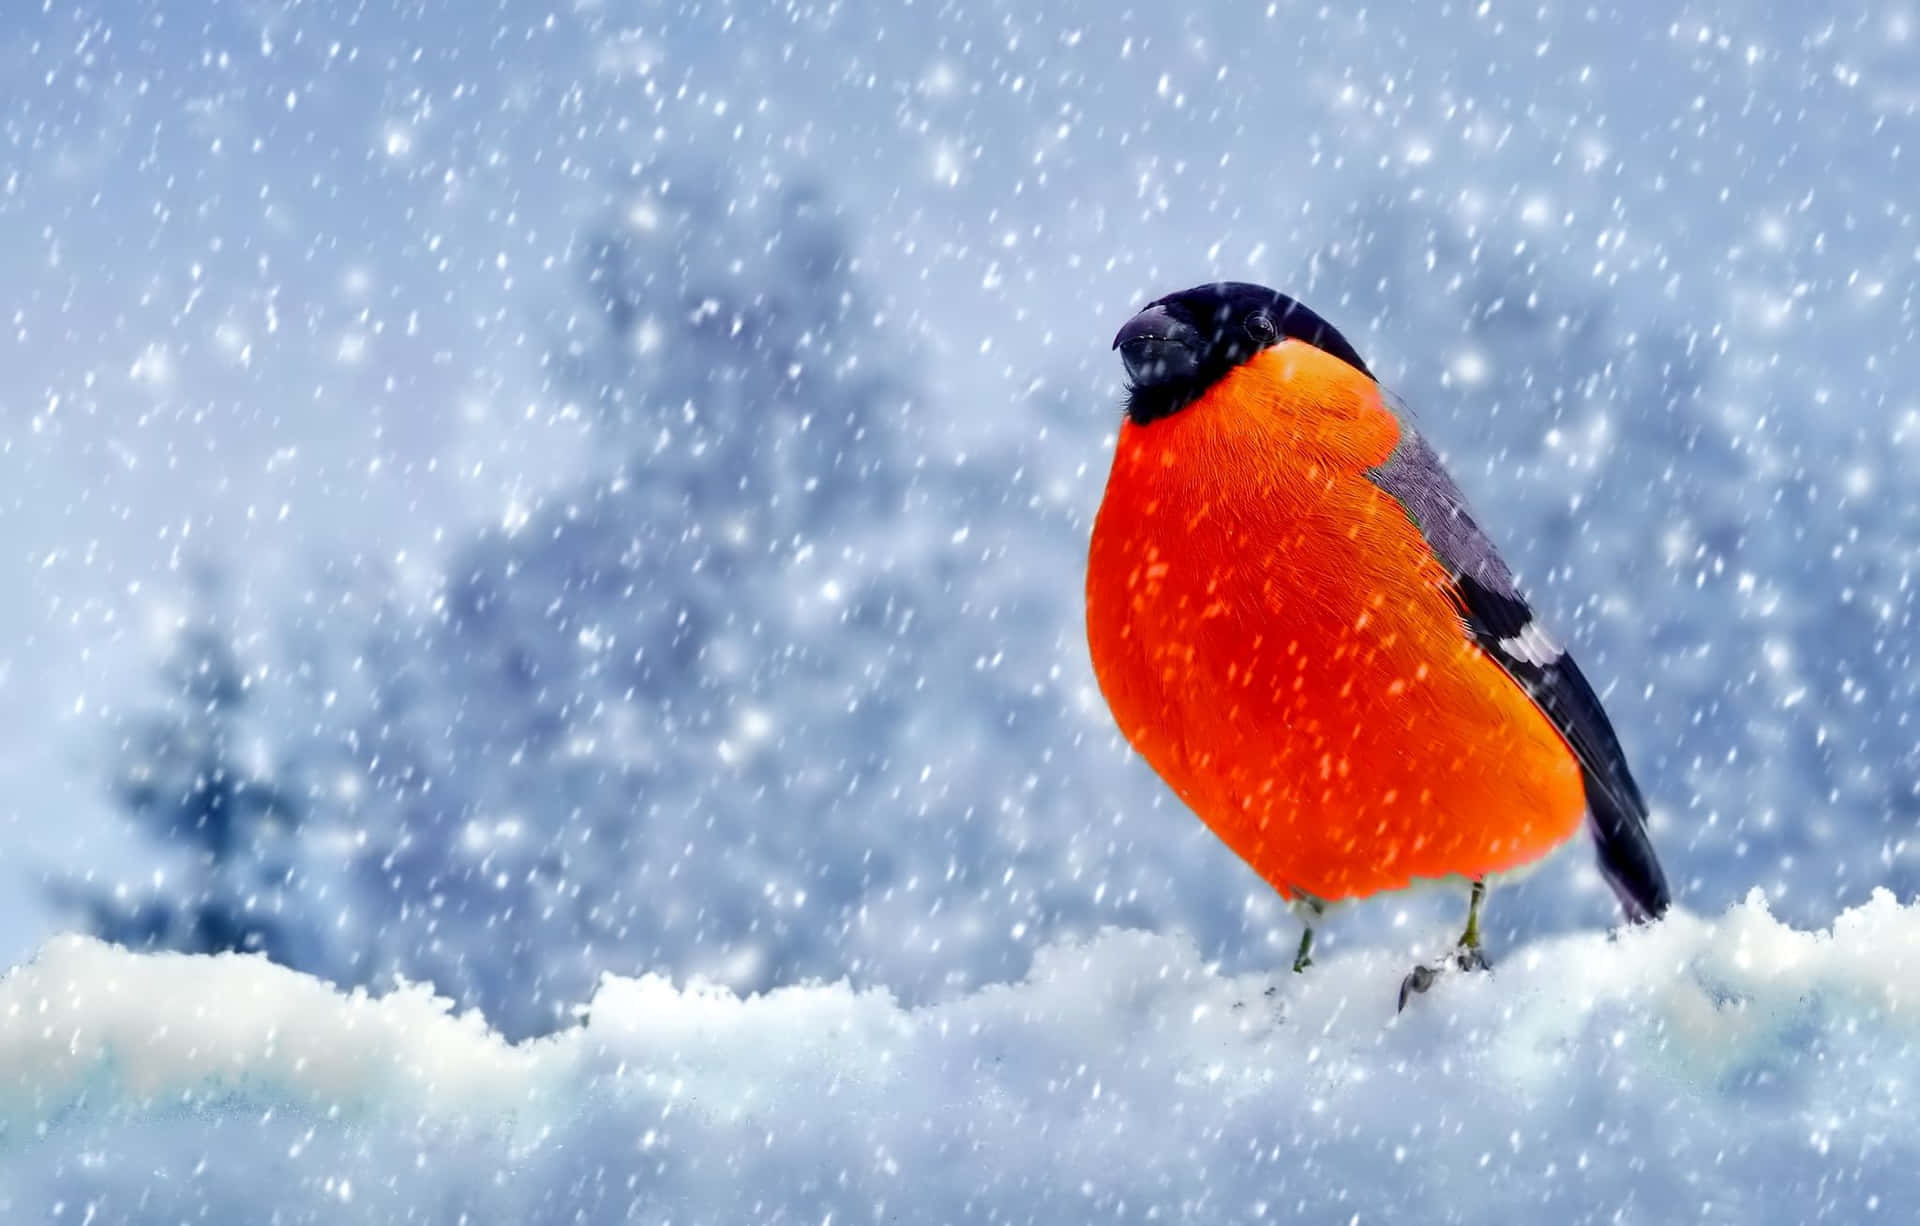 Majestic Snow Bird Perched on a Tree Branch Wallpaper